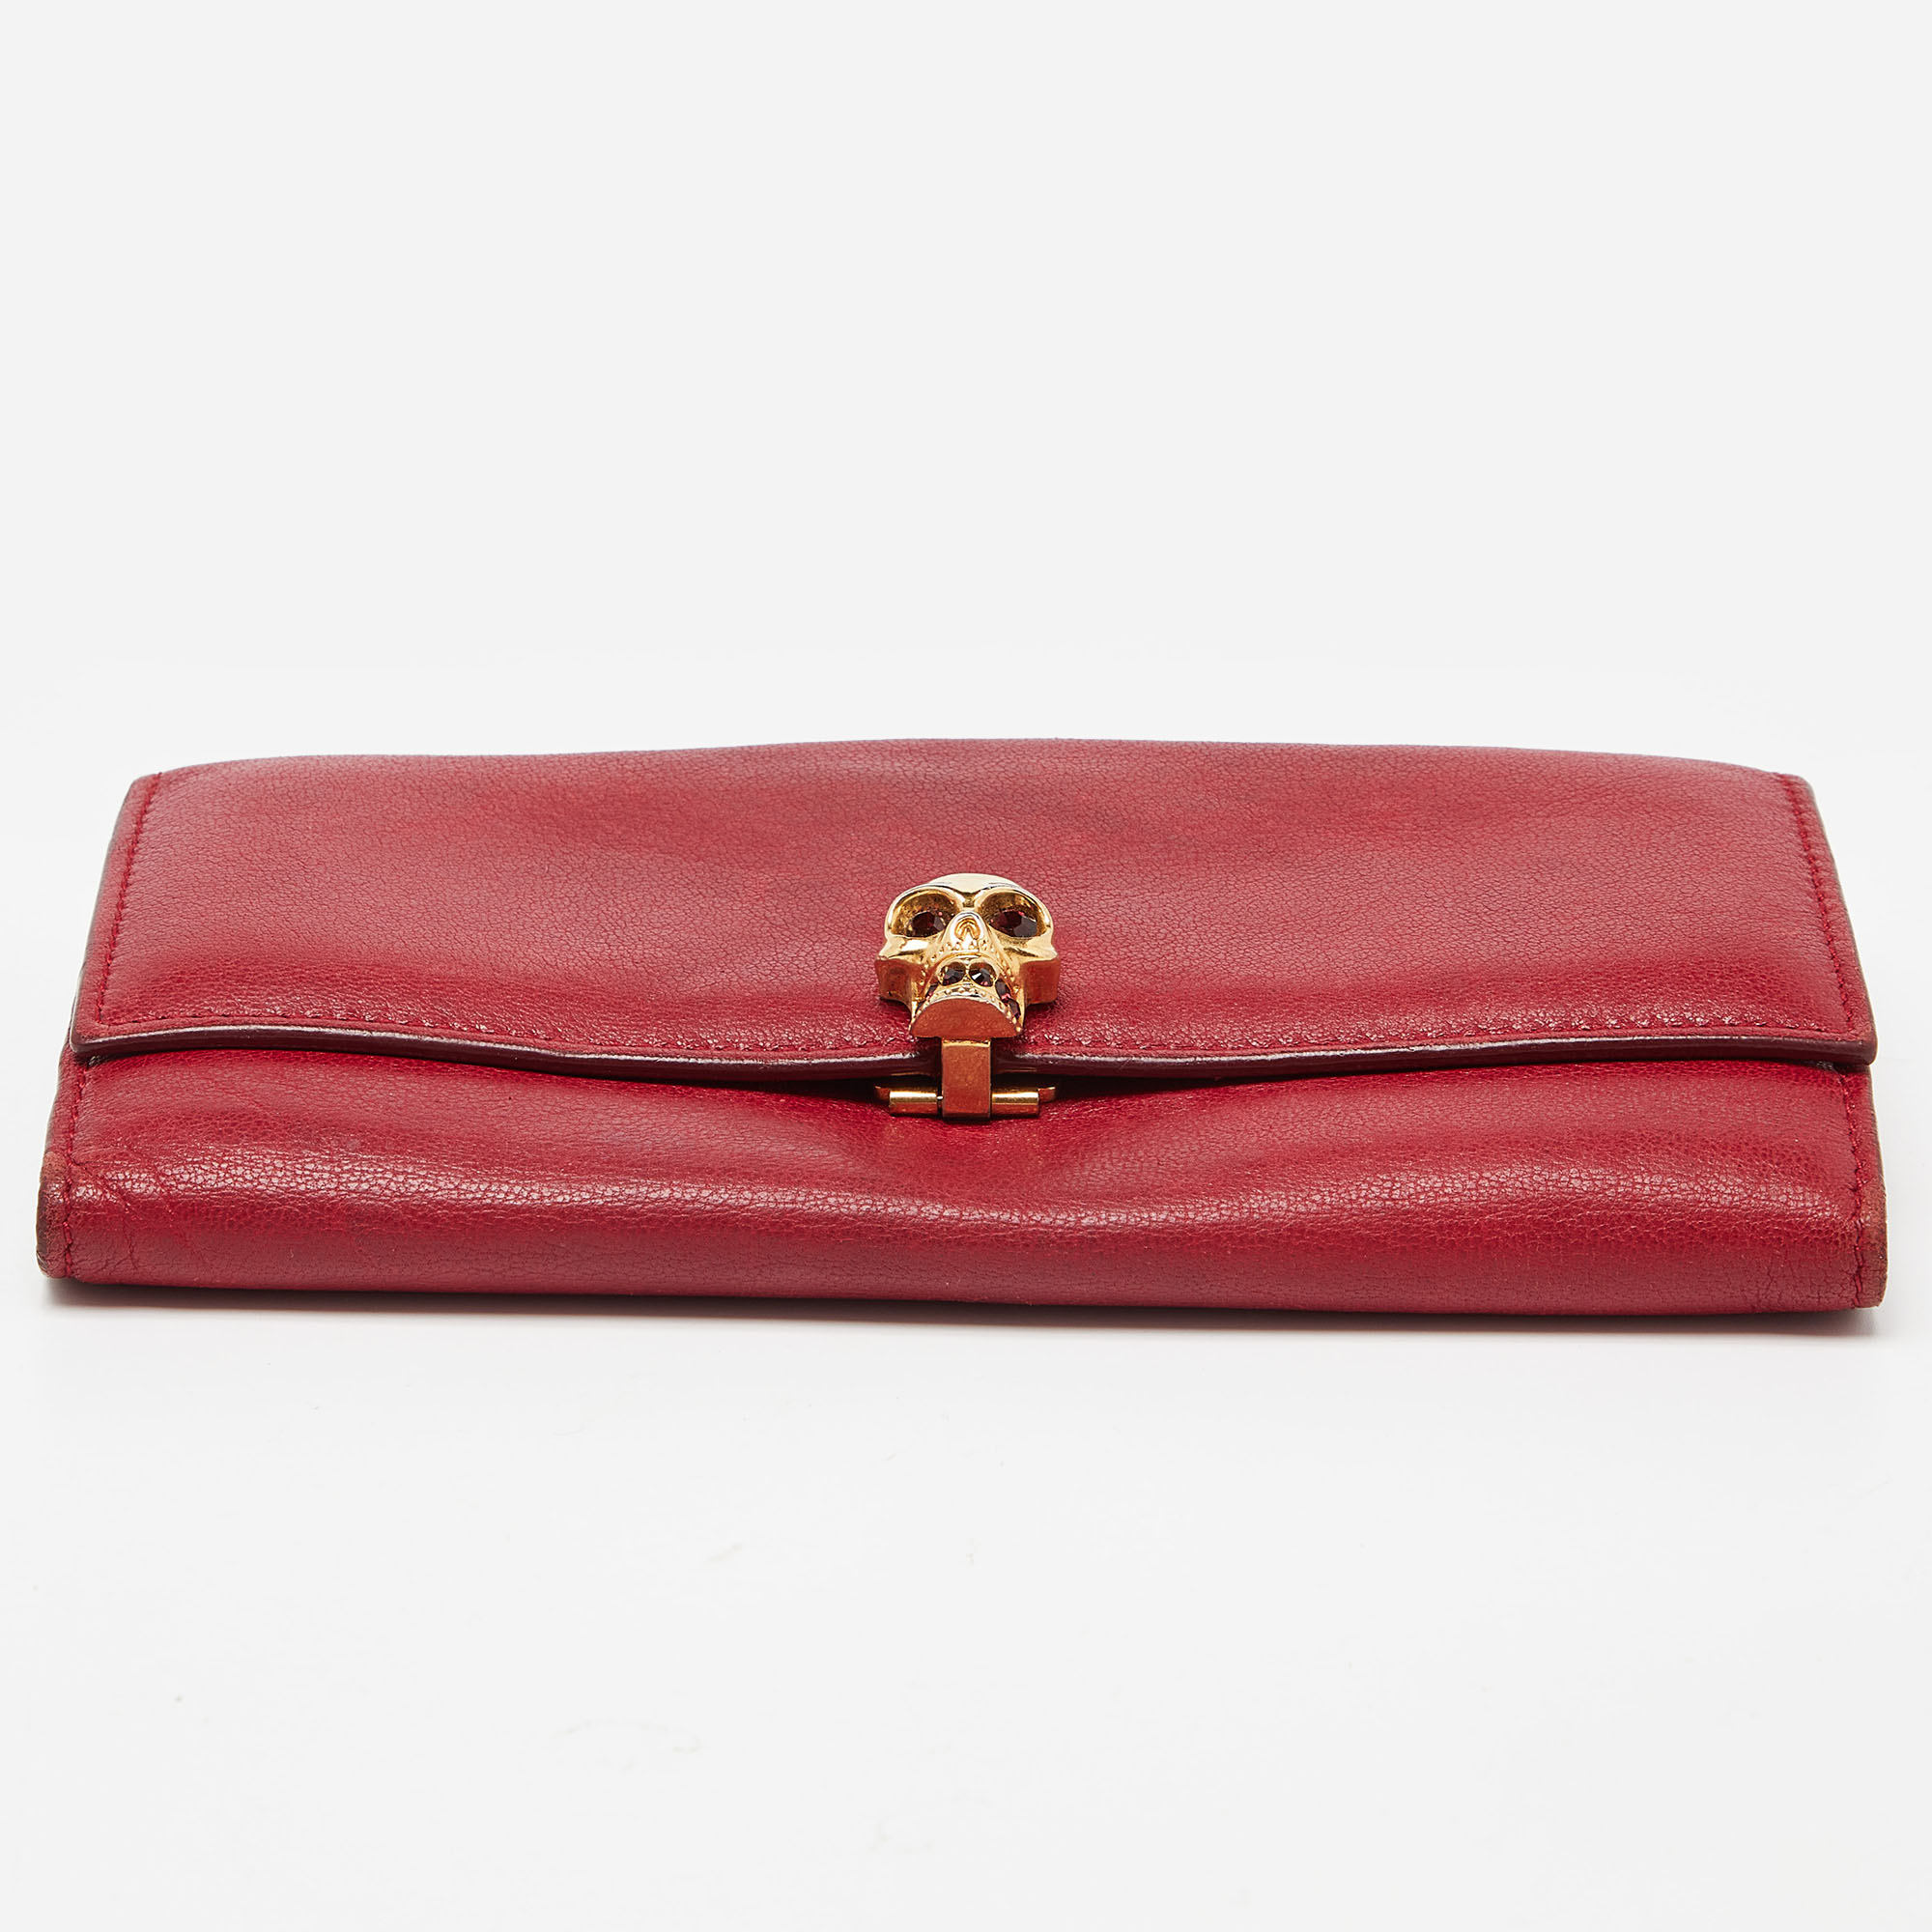 Alexander McQueen Red Leather Skull Continental Wallet